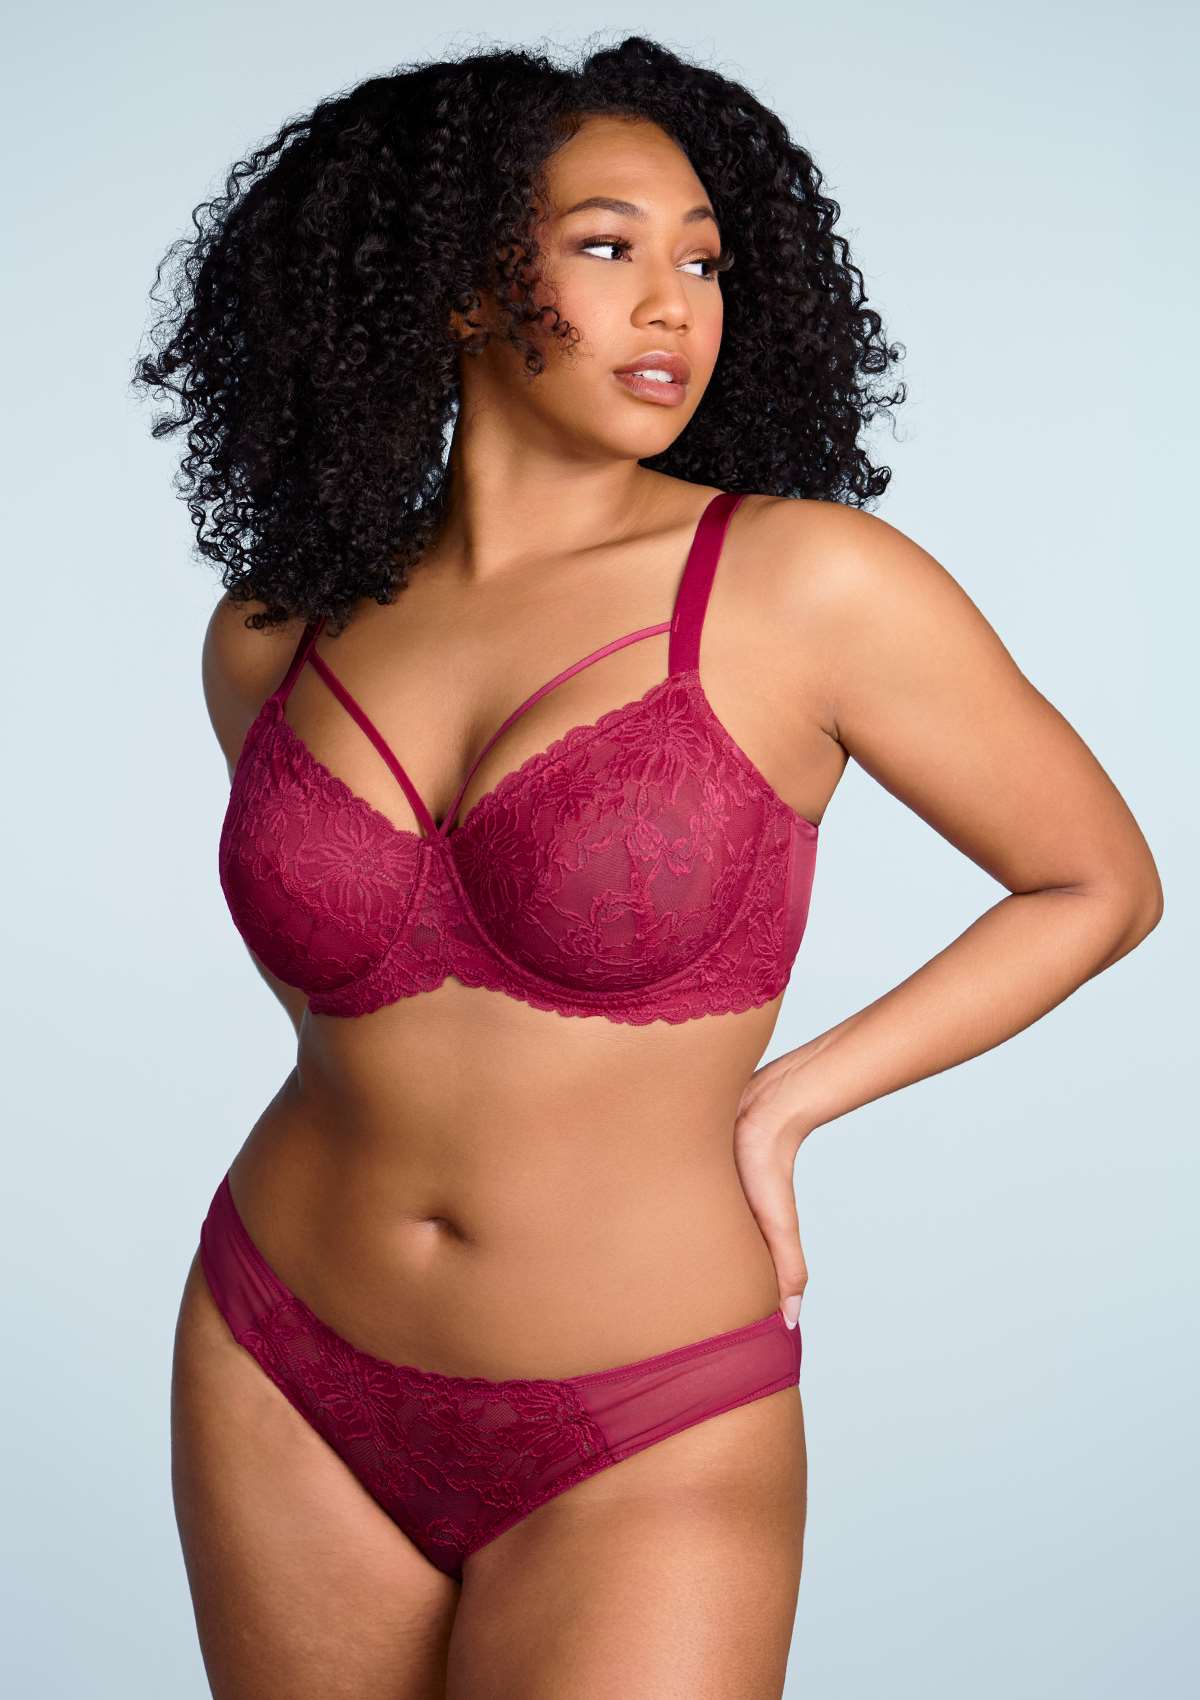 HSIA Pretty In Petals Lace Panties And Bra Set: Plus Size Women Bra - Red / 40 / DDD/F